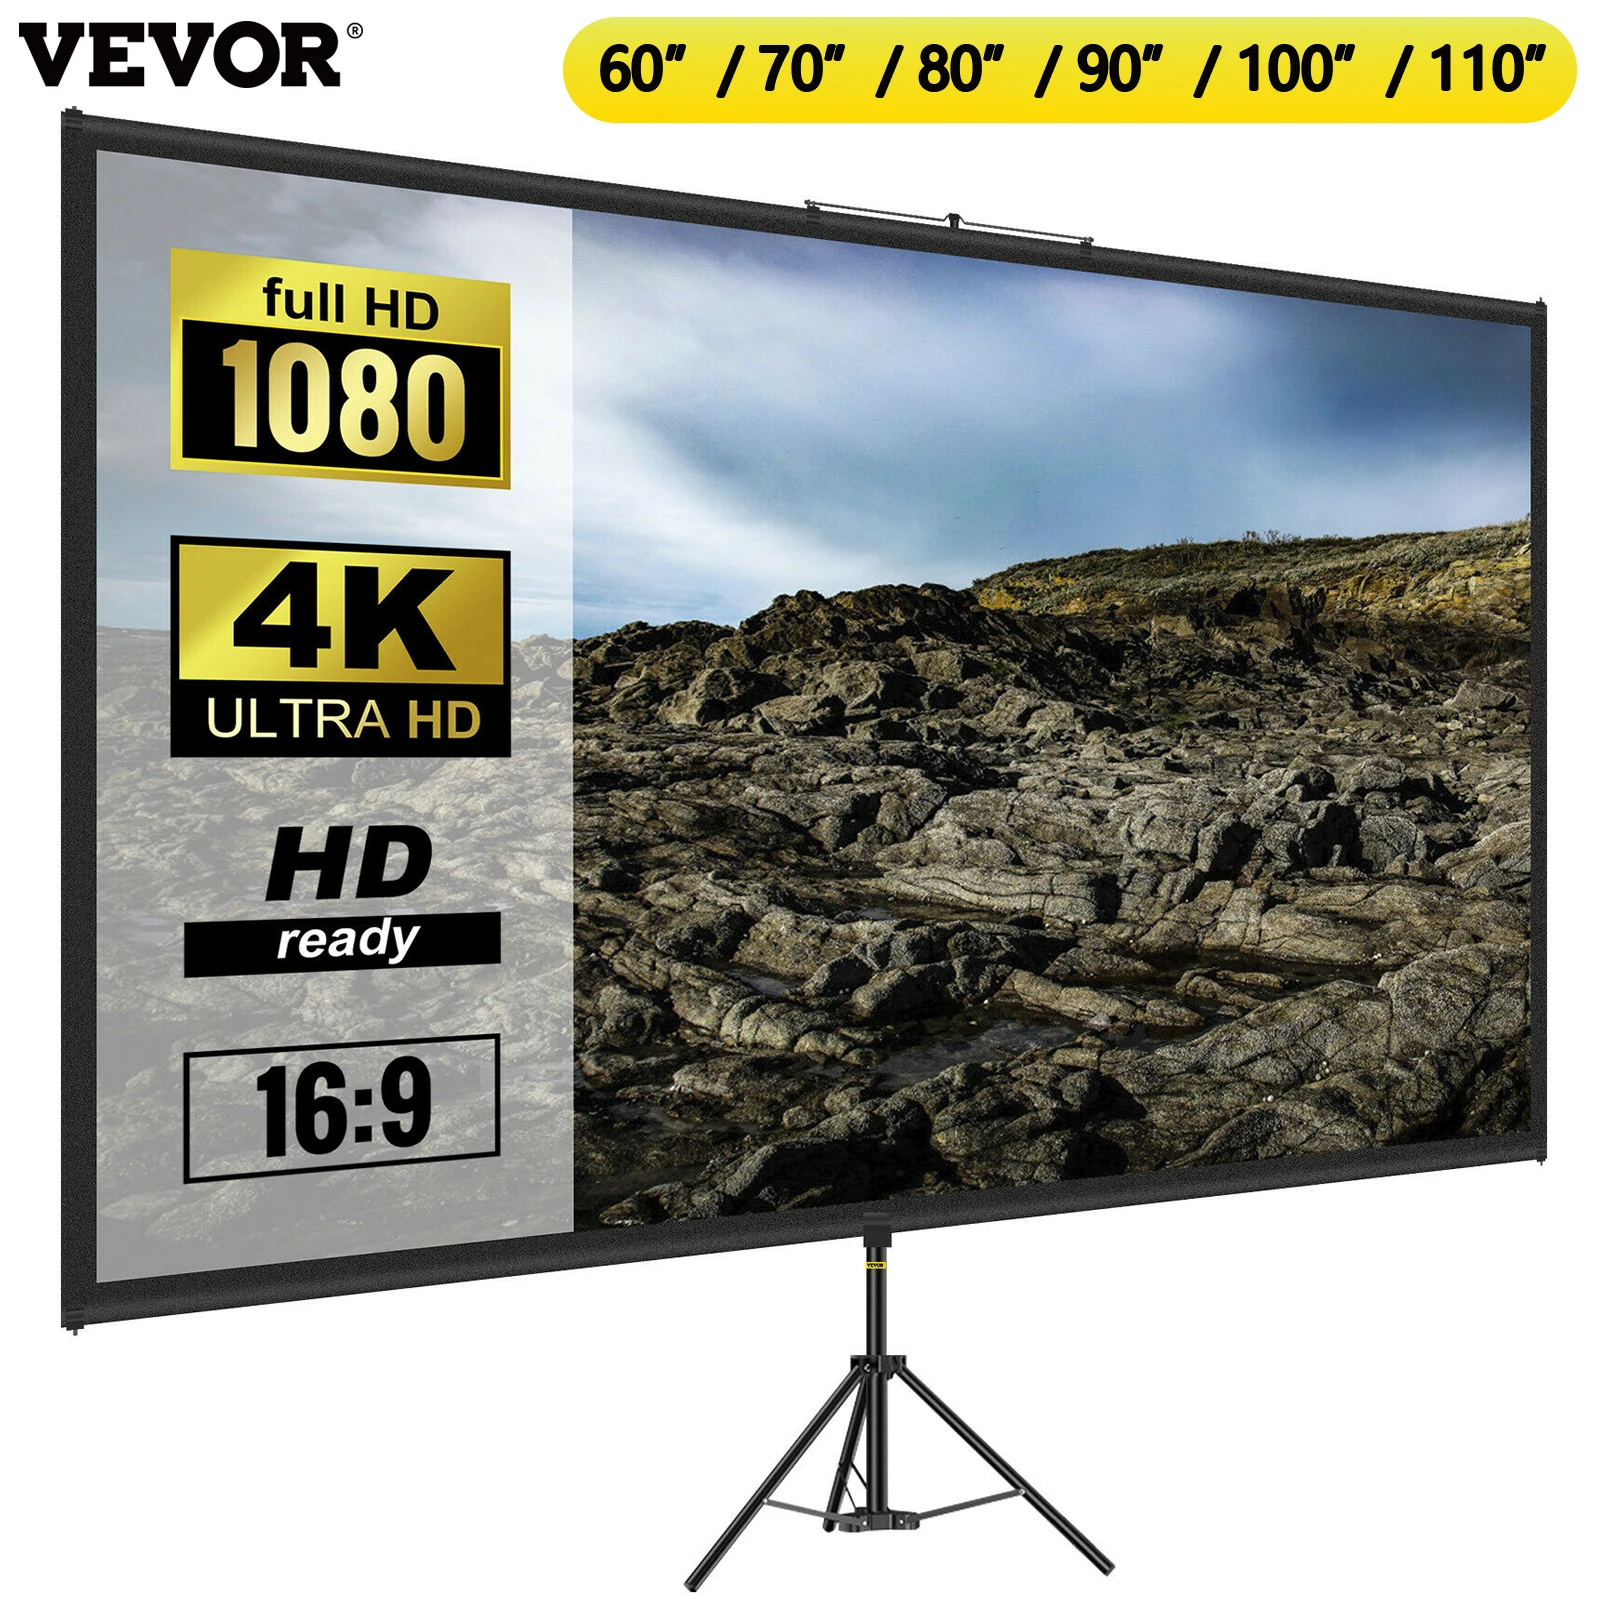 VEVOR 60 70 80 90 100 110 Inch Tripod Projector Screen W/ Stand 16:9 4K HD Portable Home Cinema for Indoor & Outdoor